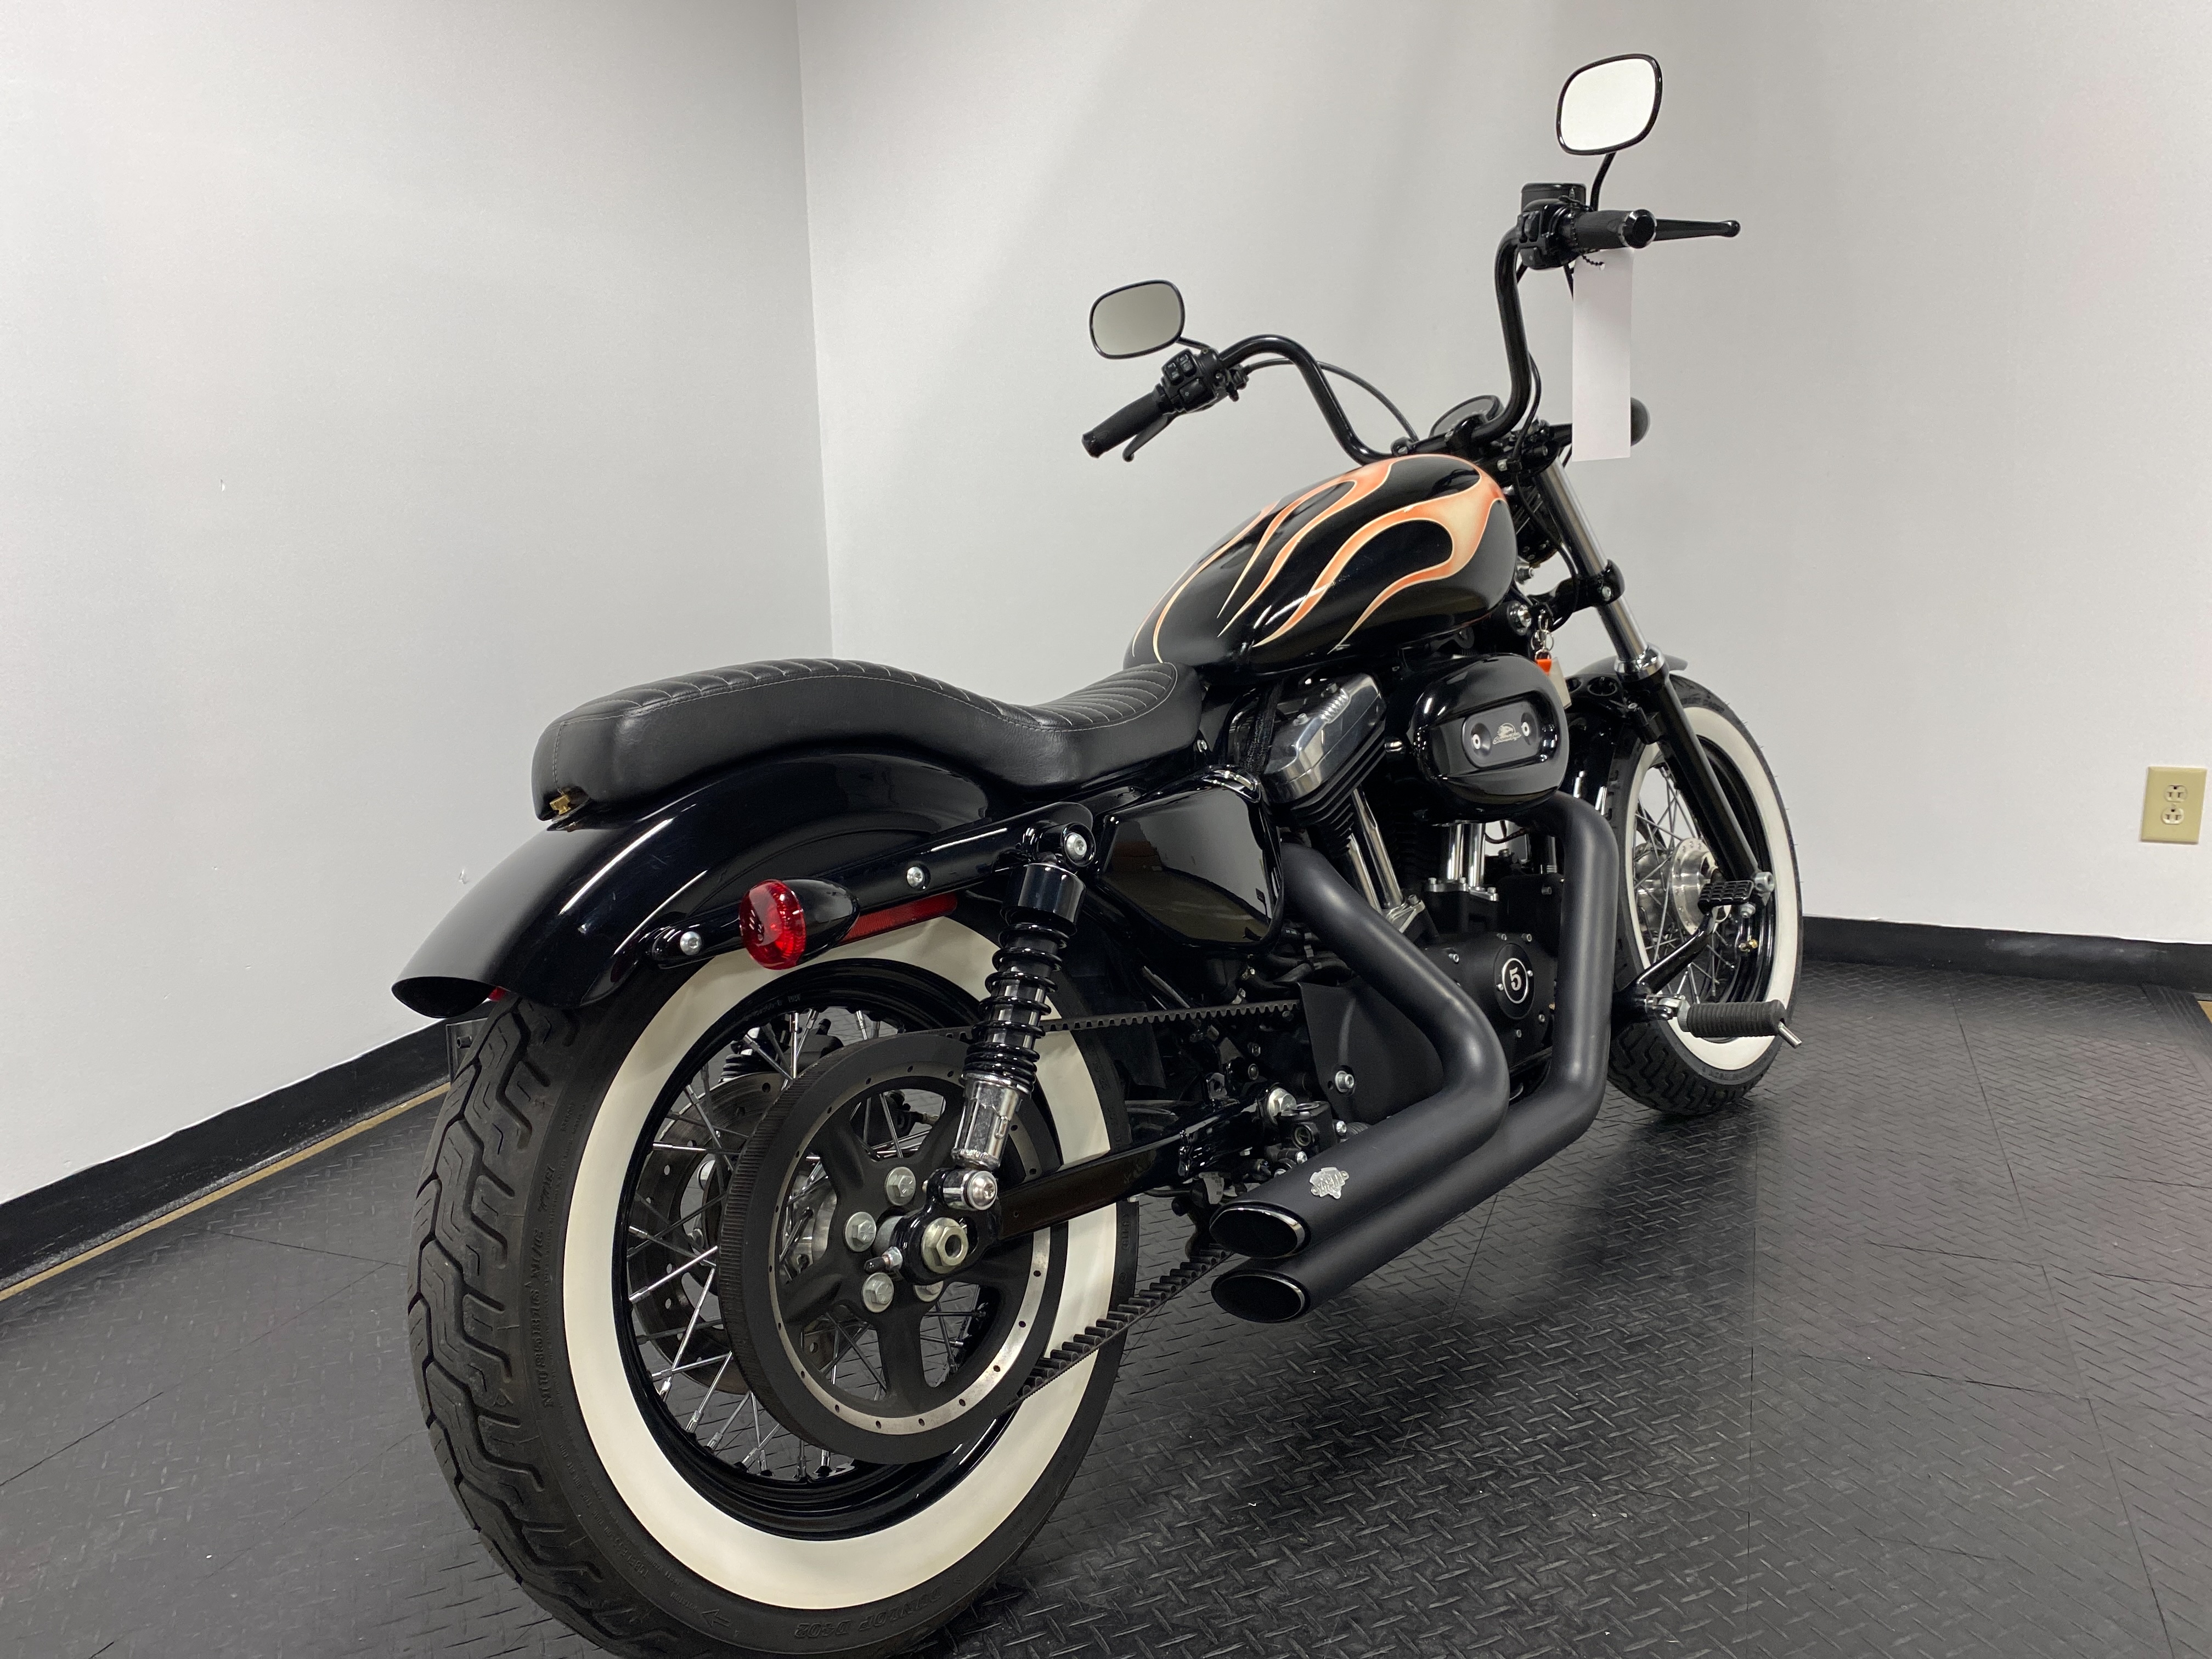 2014 Harley-Davidson Sportster Forty-Eight at Cannonball Harley-Davidson